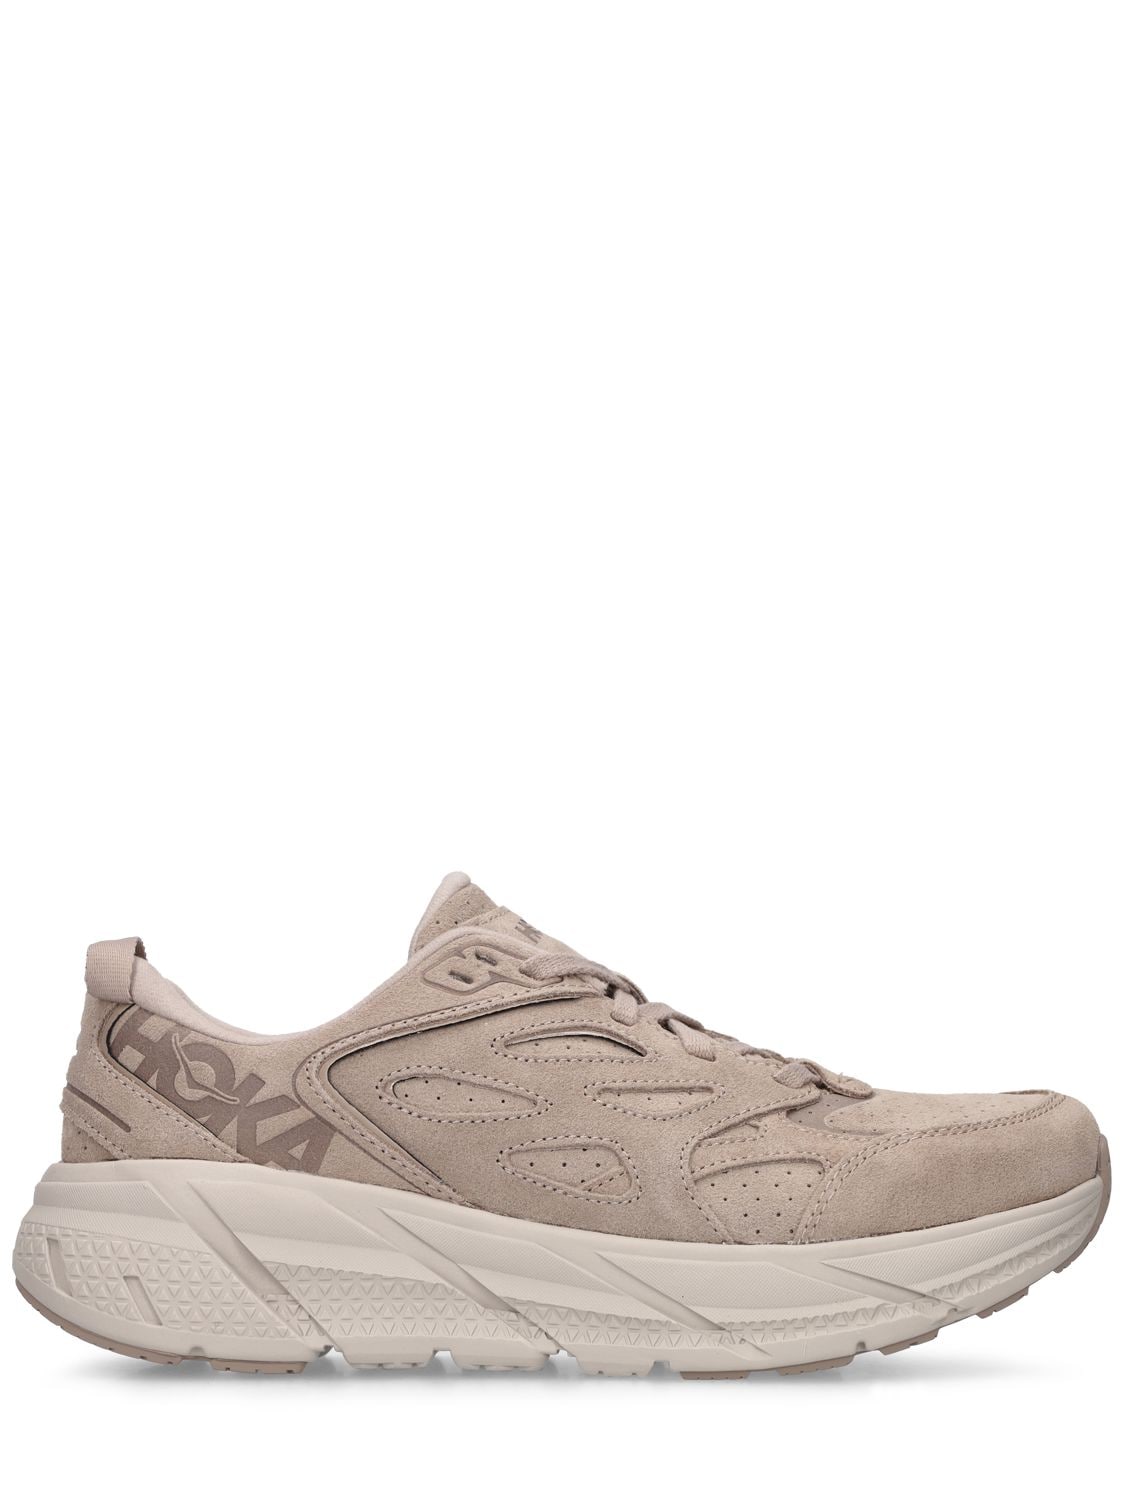 Hoka One One Clifton L Suede Lifestyle Sneakers In Brown